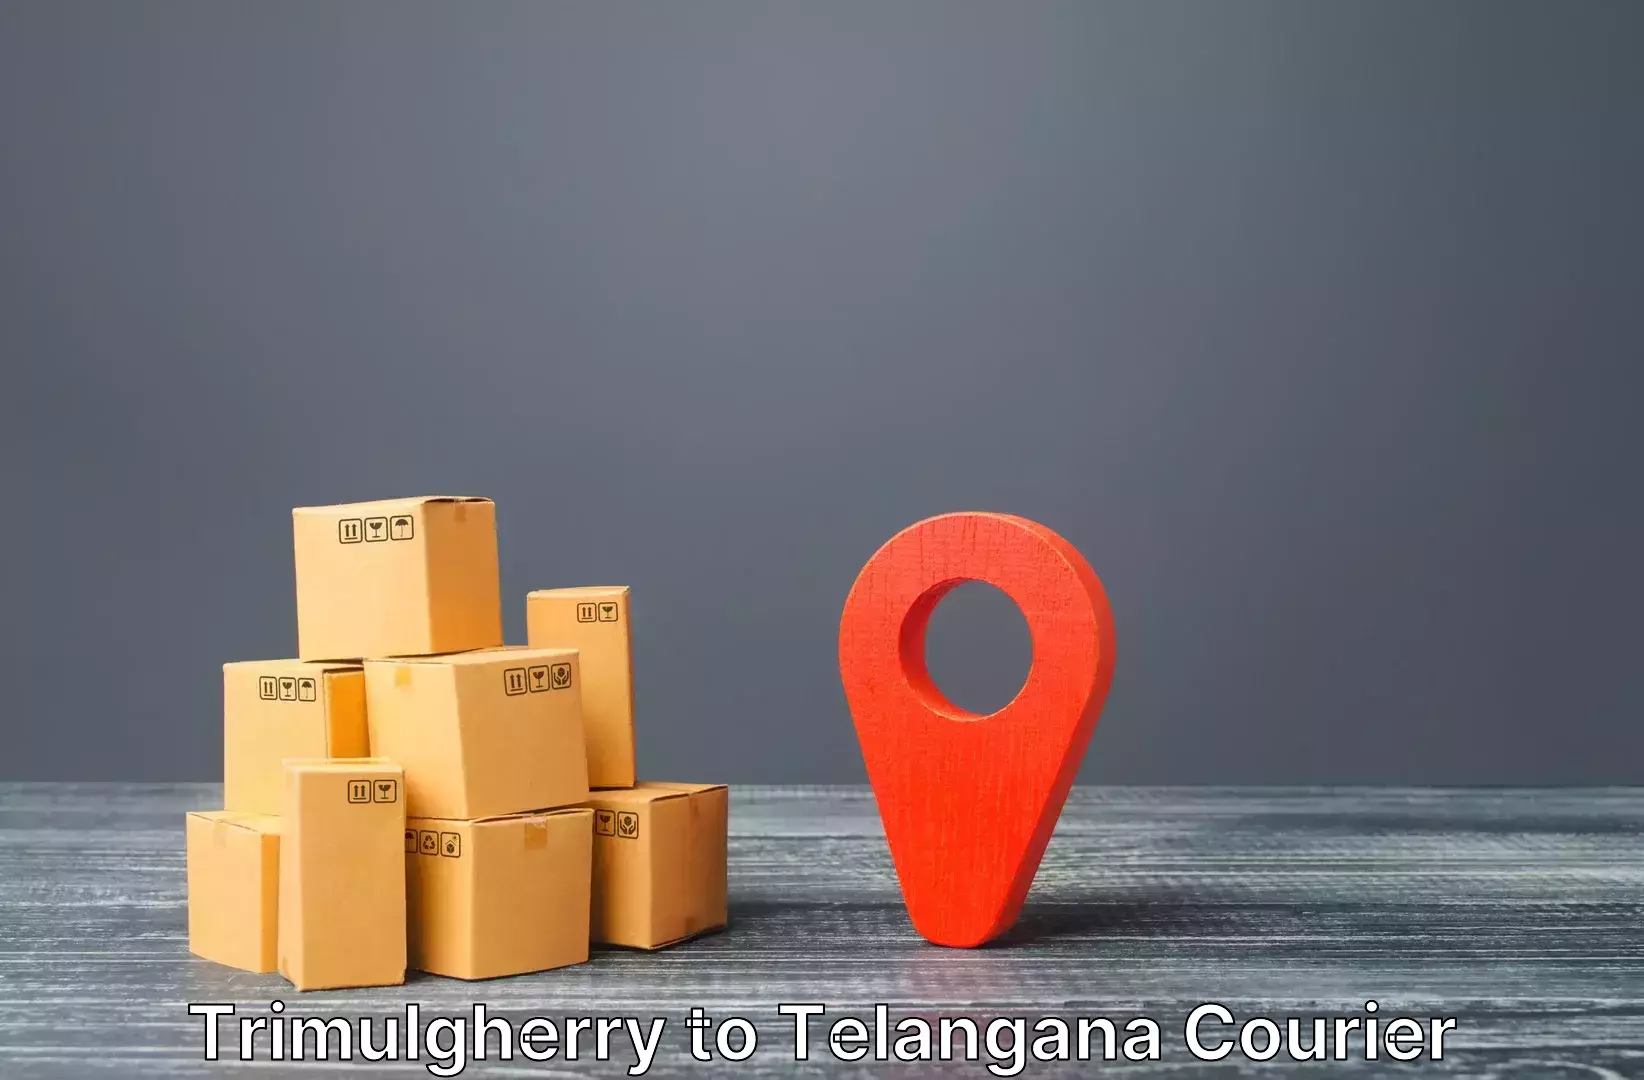 Holiday baggage shipping in Trimulgherry to Dubbak